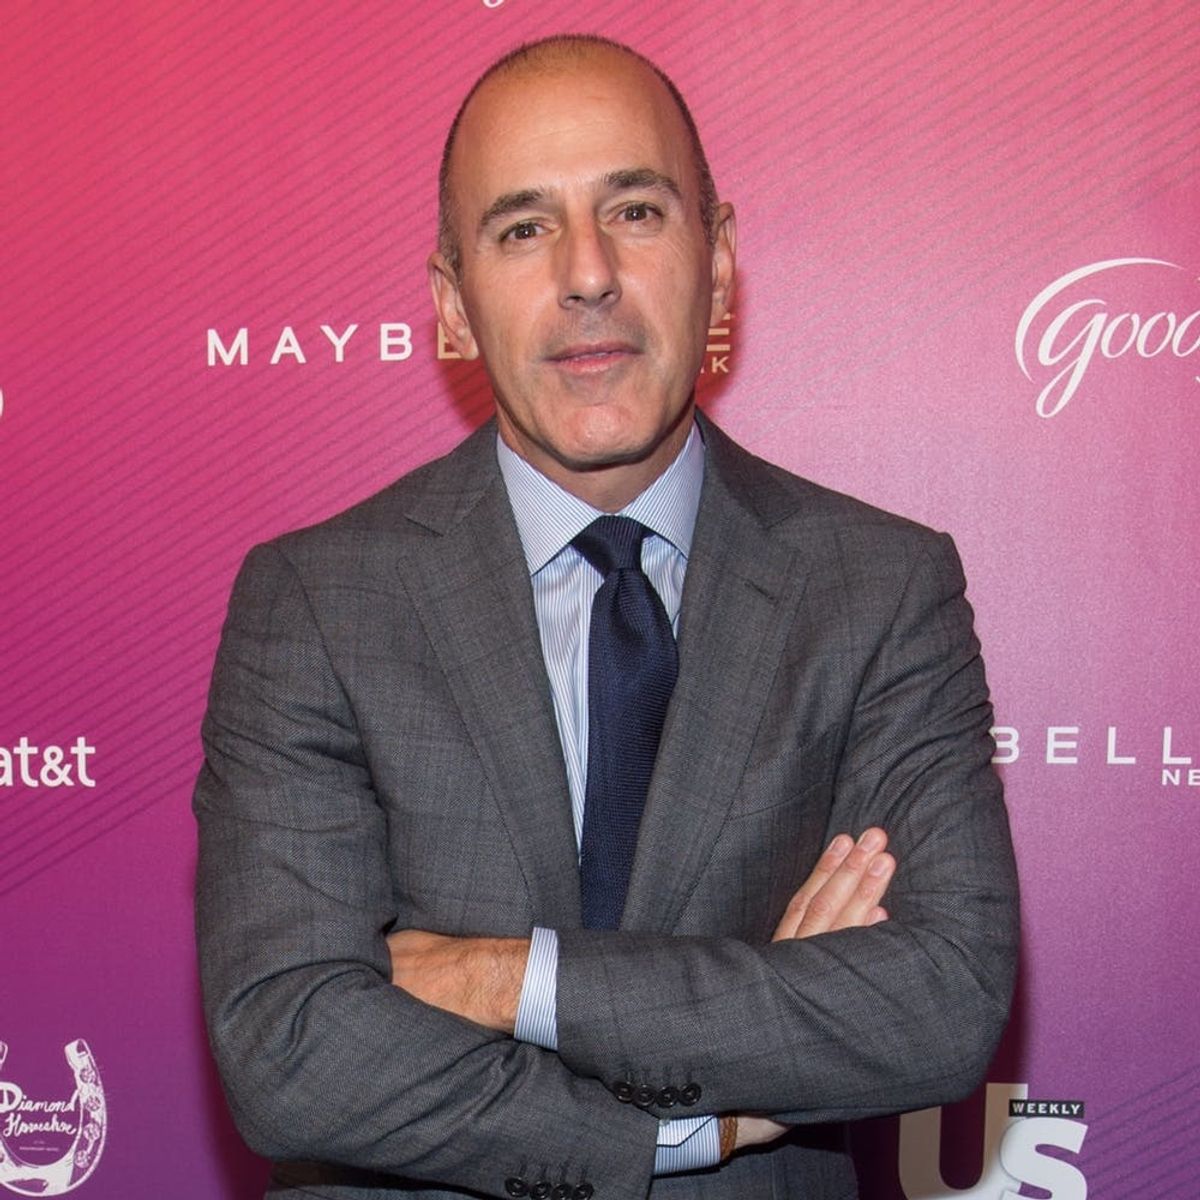 NBC Reportedly Has Extreme New Anti-Sexual Harassment Rules for Staff Post-Matt Lauer